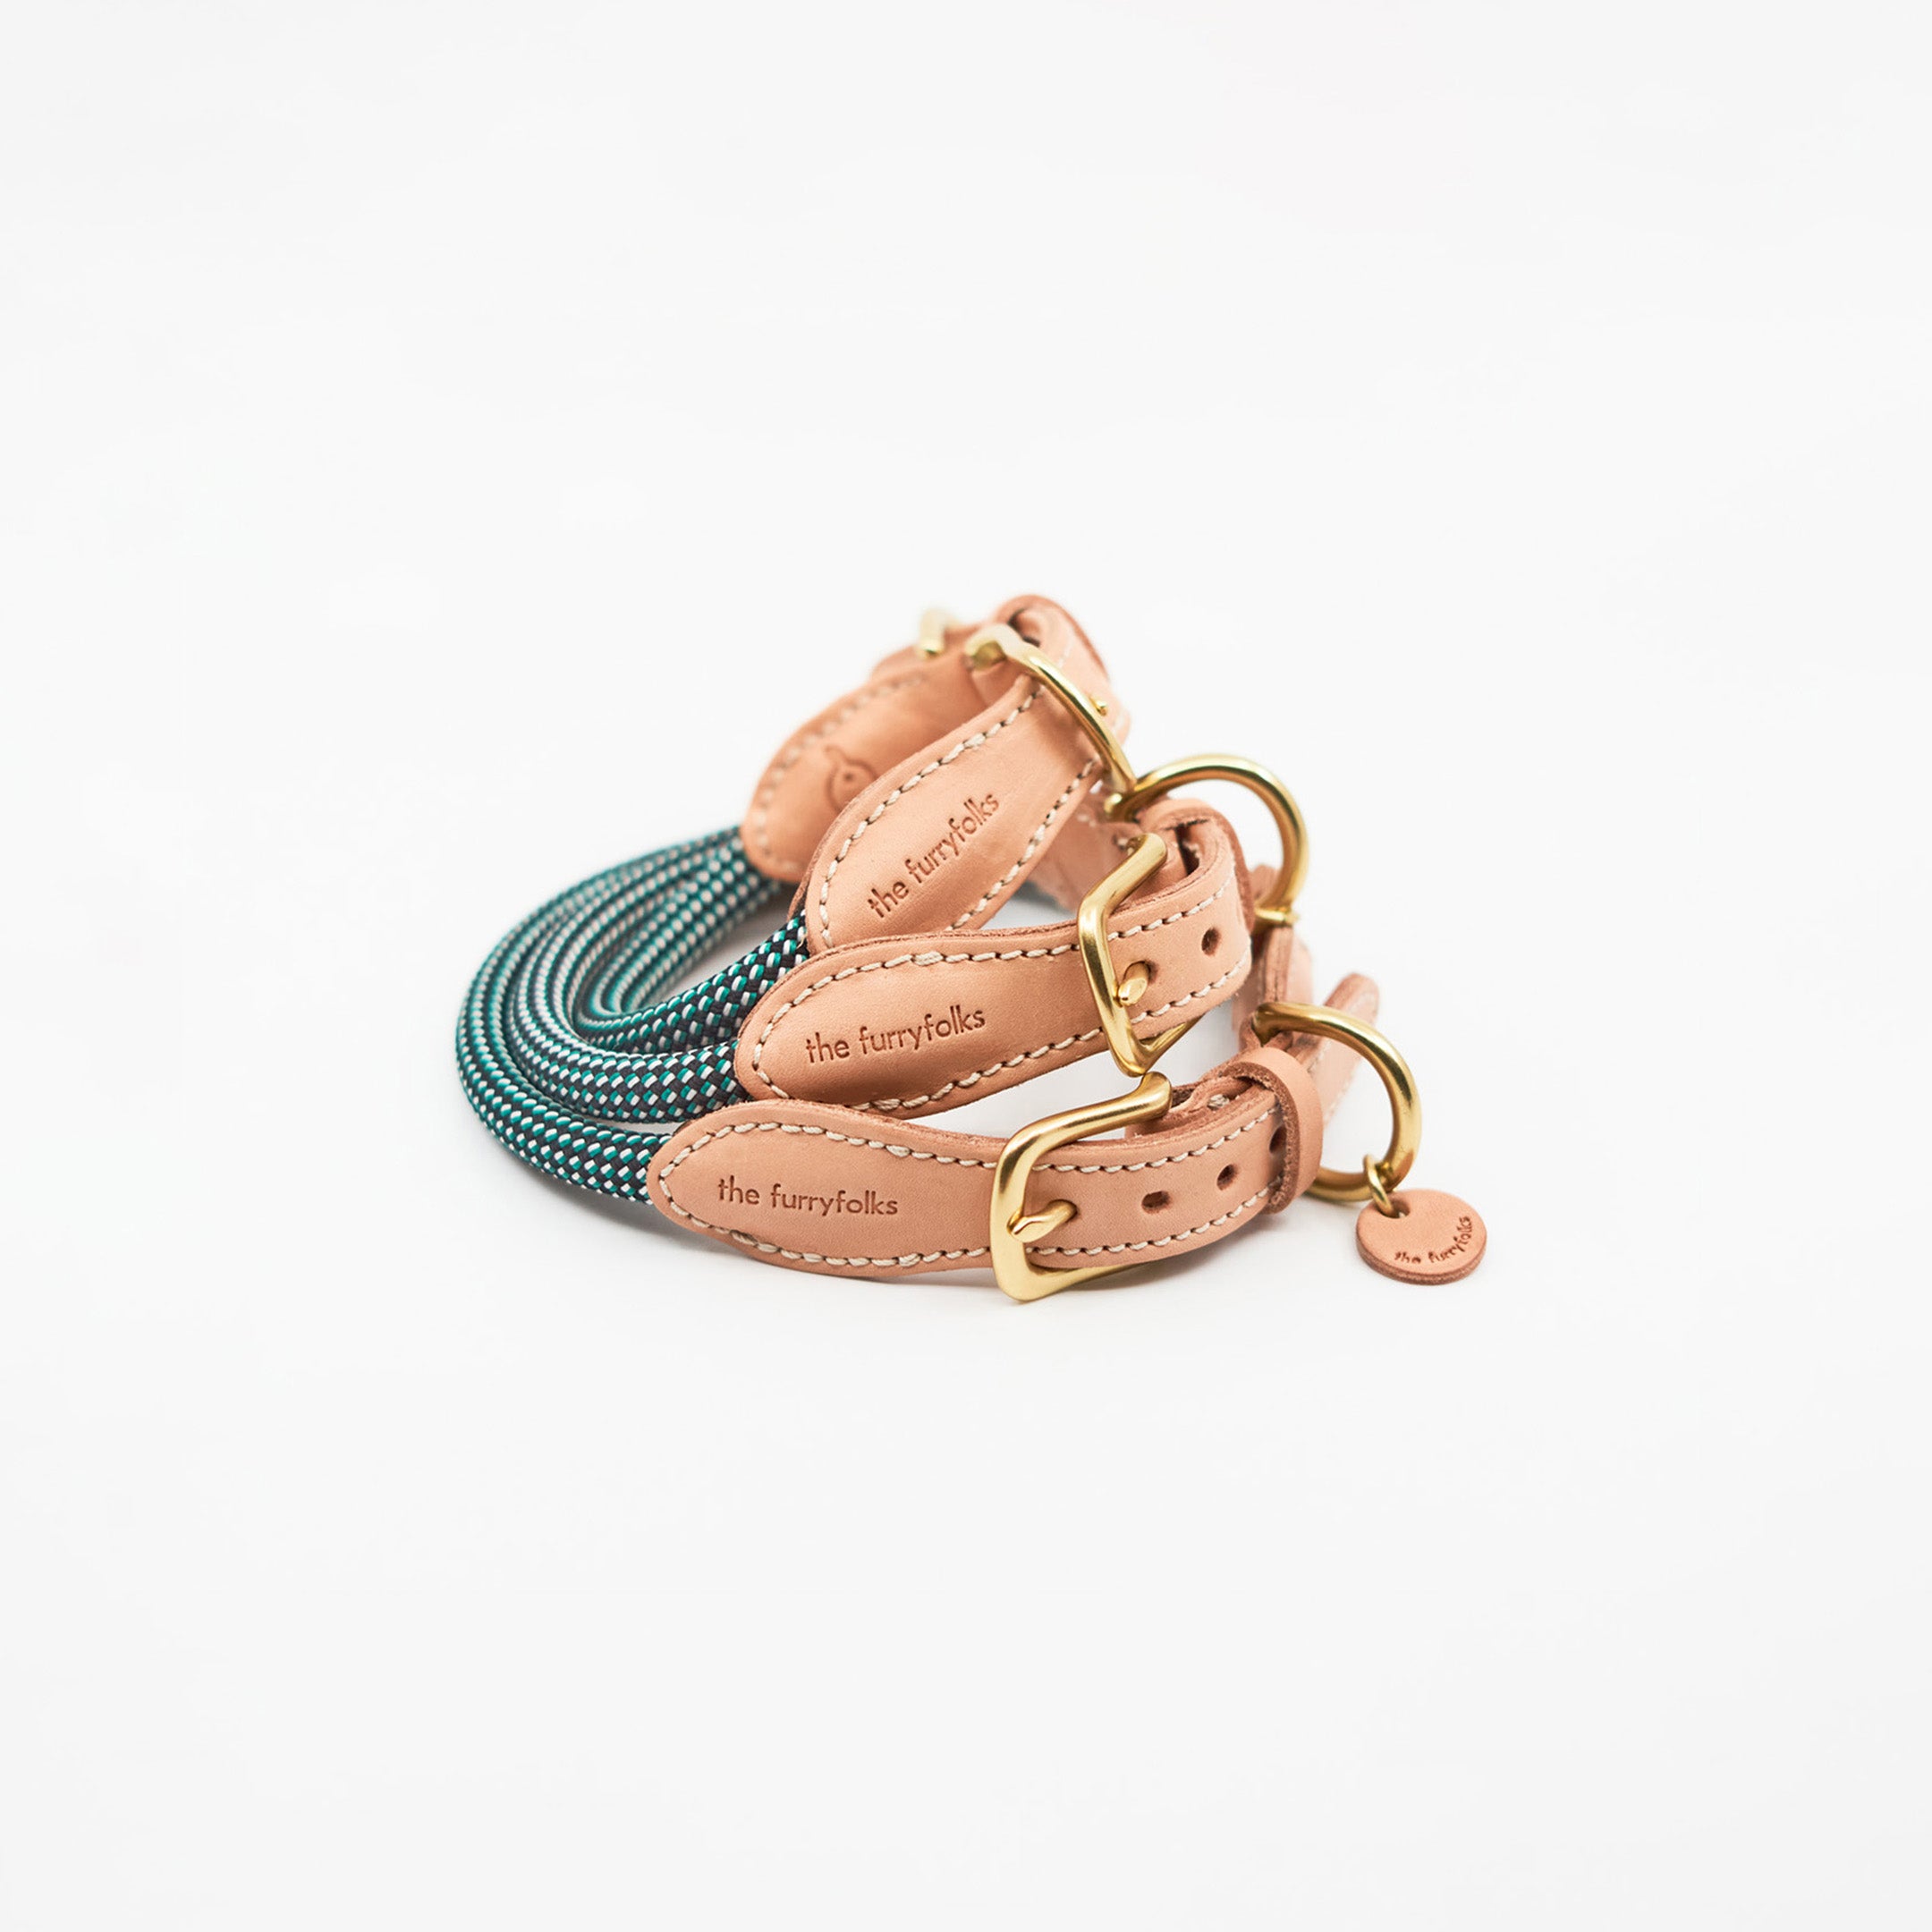 This image features a dog collar and leash set by "The Furryfolks". The pieces are fashioned with a teal and black woven fabric and complemented by tan leather accents and gold-tone hardware. Each leather piece is stamped with the brand's name, suggesting a signature design element. The background is white, which highlights the rich color and texture of the leash and collar. The design implies a blend of functionality and style for pet accessories.